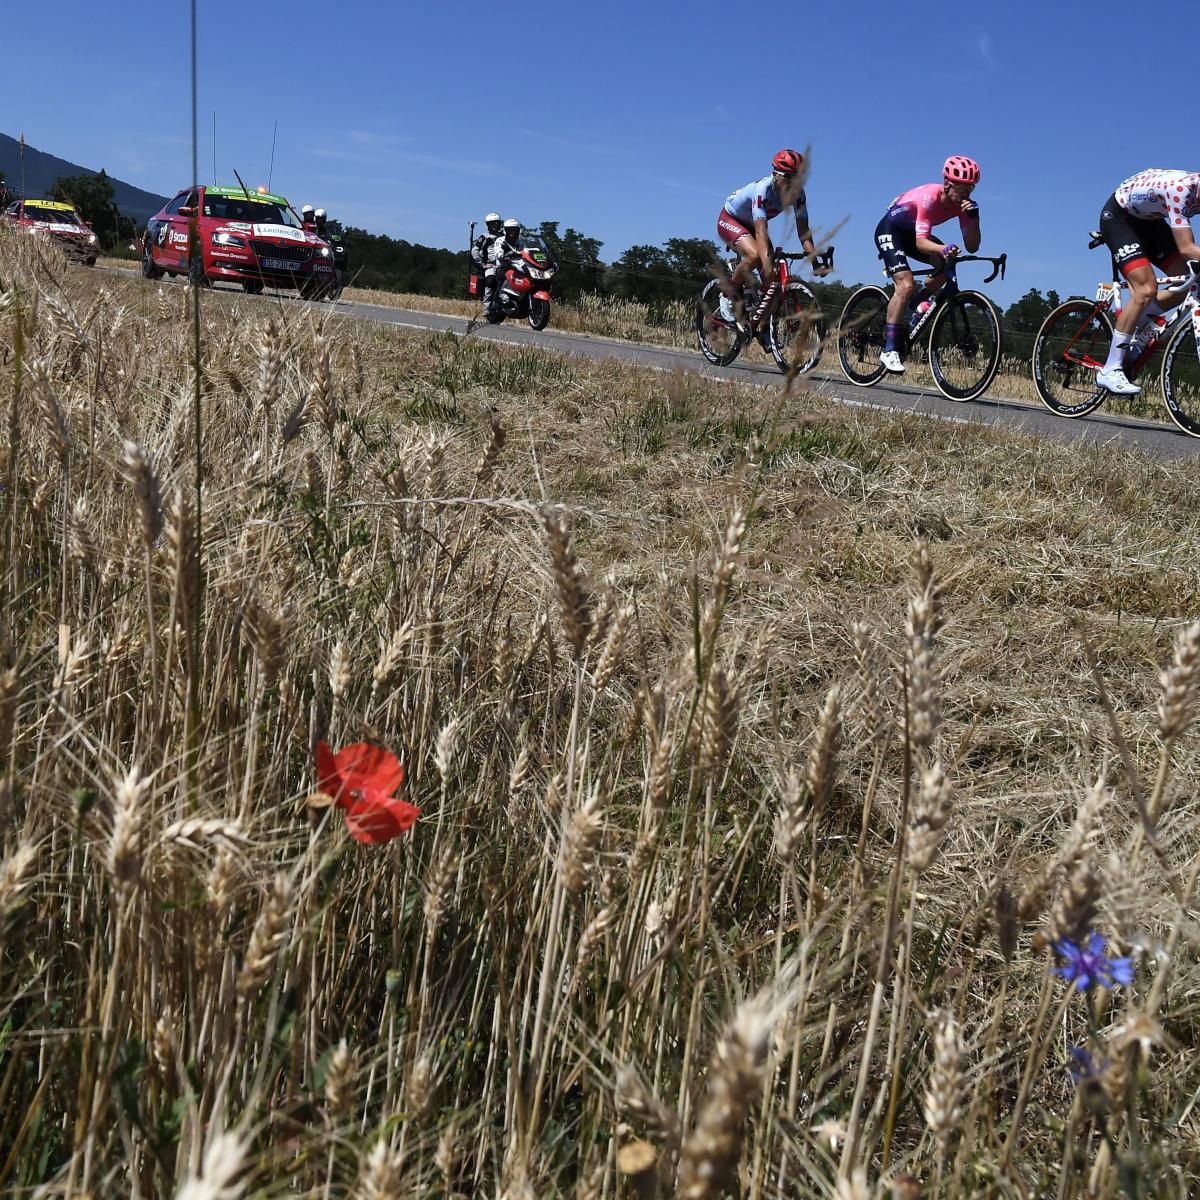 Tour de France 2019 Friday's Stage 7 LiveStream Schedule, TV Info and